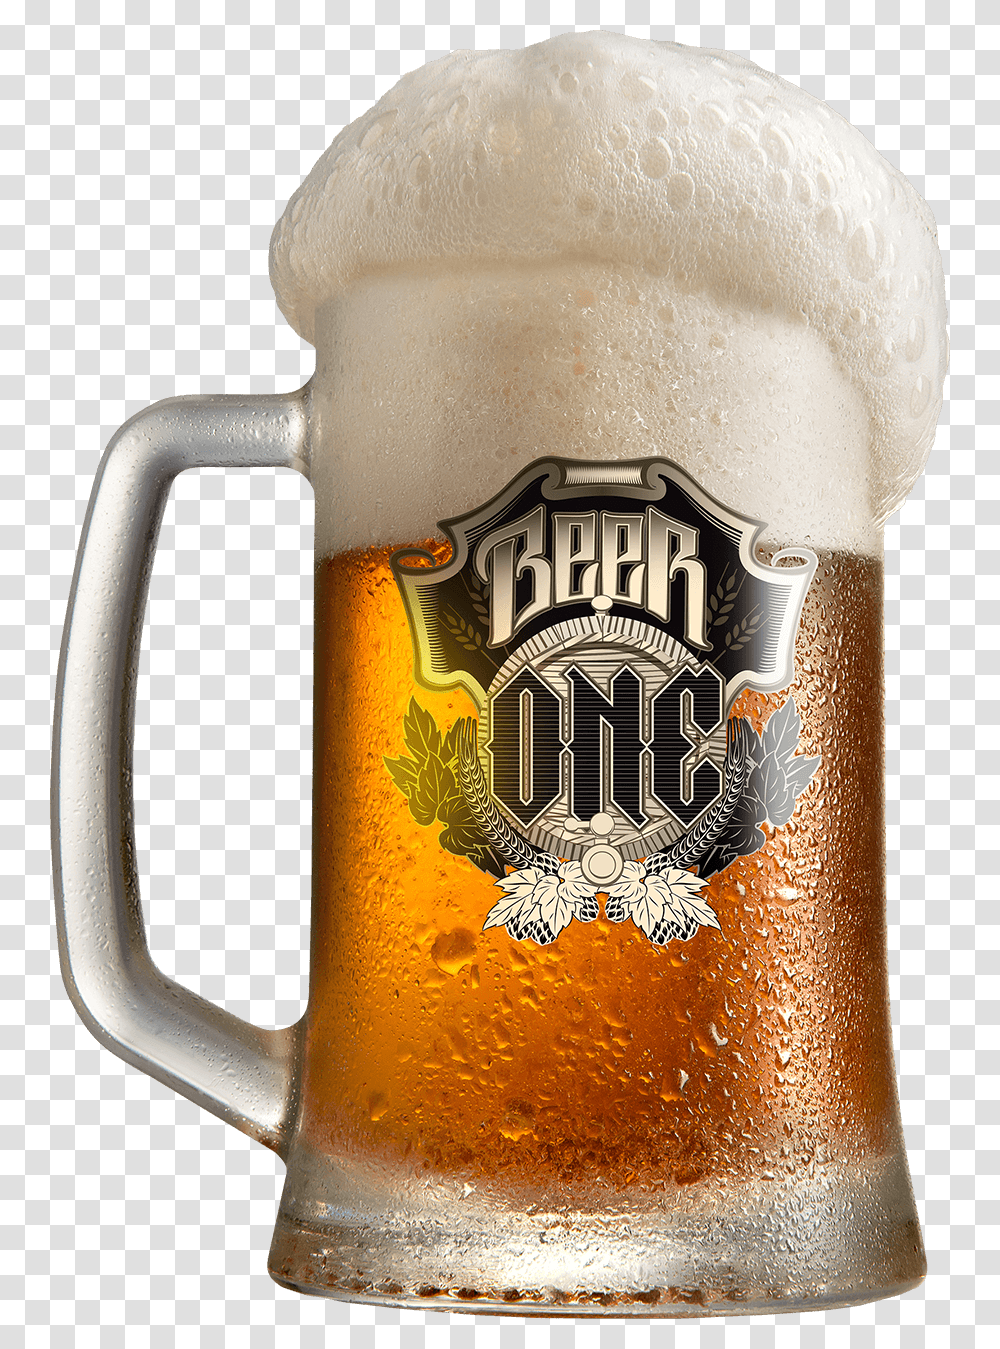 Lager Beer Wheat Stein Glasses Free Image Beer One, Beer Glass, Alcohol, Beverage, Drink Transparent Png